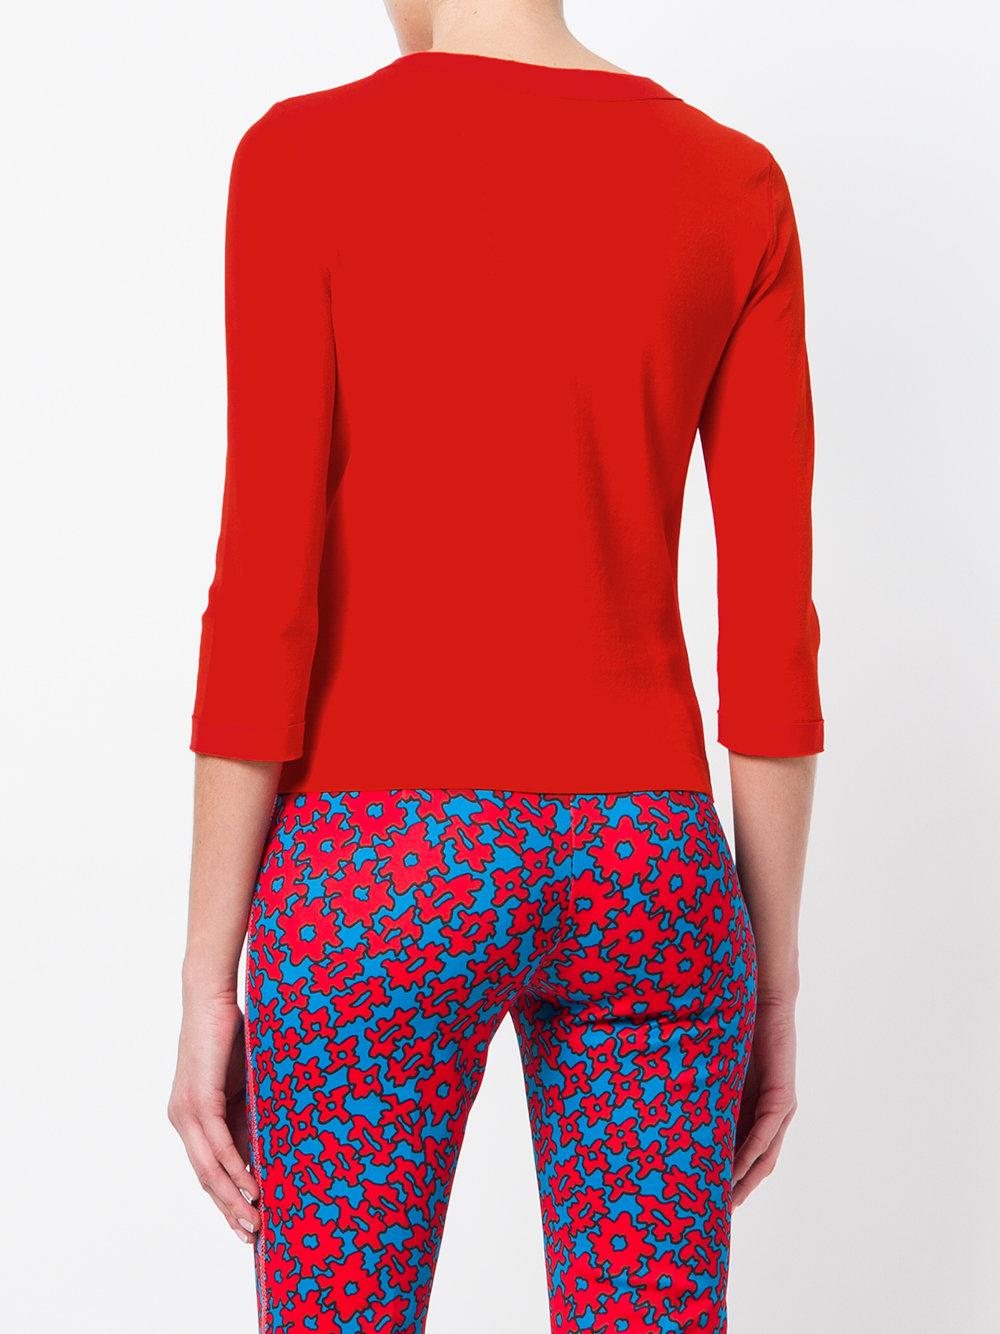 Lyst - Marc Cain Cropped Sleeved Cardigan in Red